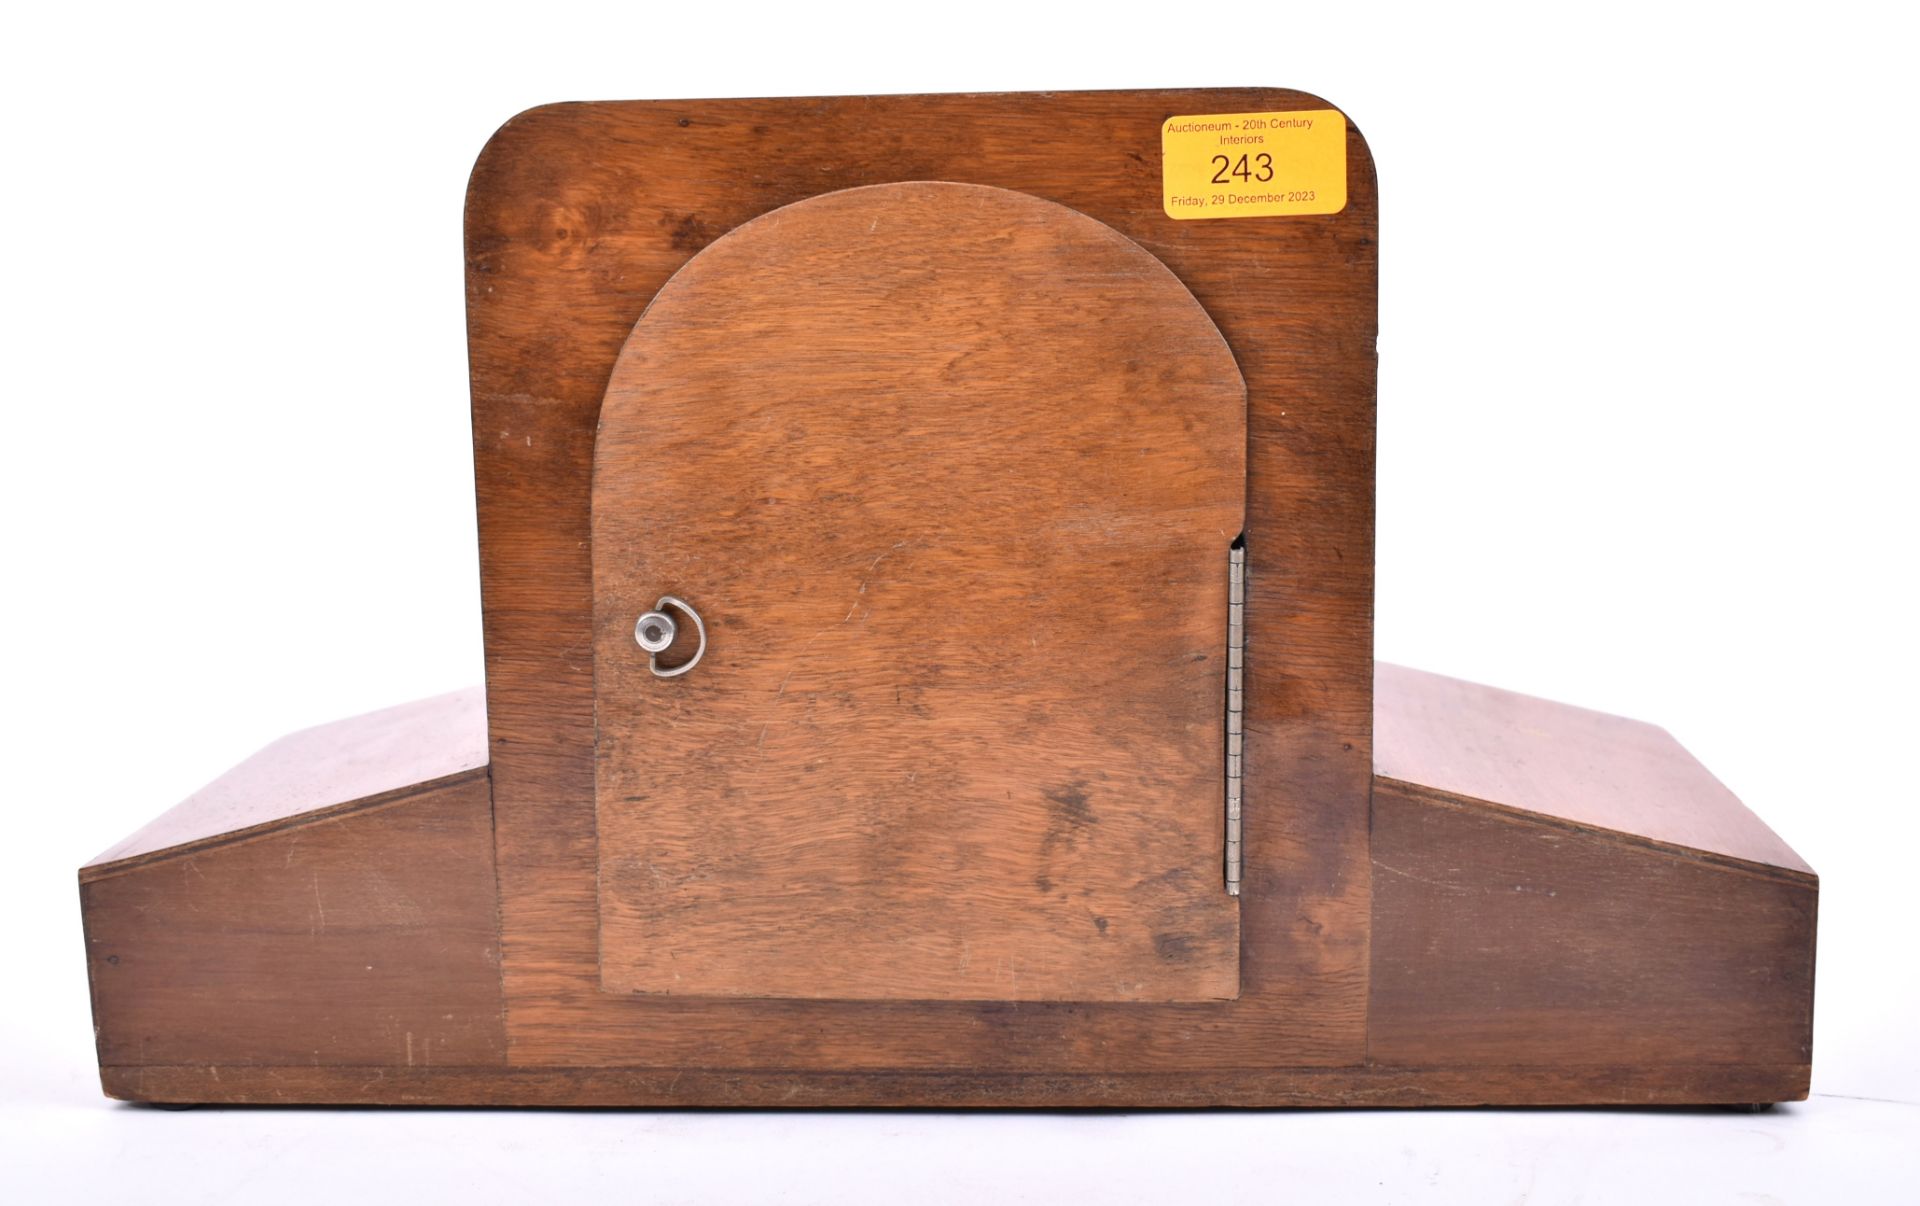 ART DECO STYLE WESTMINSTER CHIME WALNUT MANTEL CLOCK - Image 6 of 8